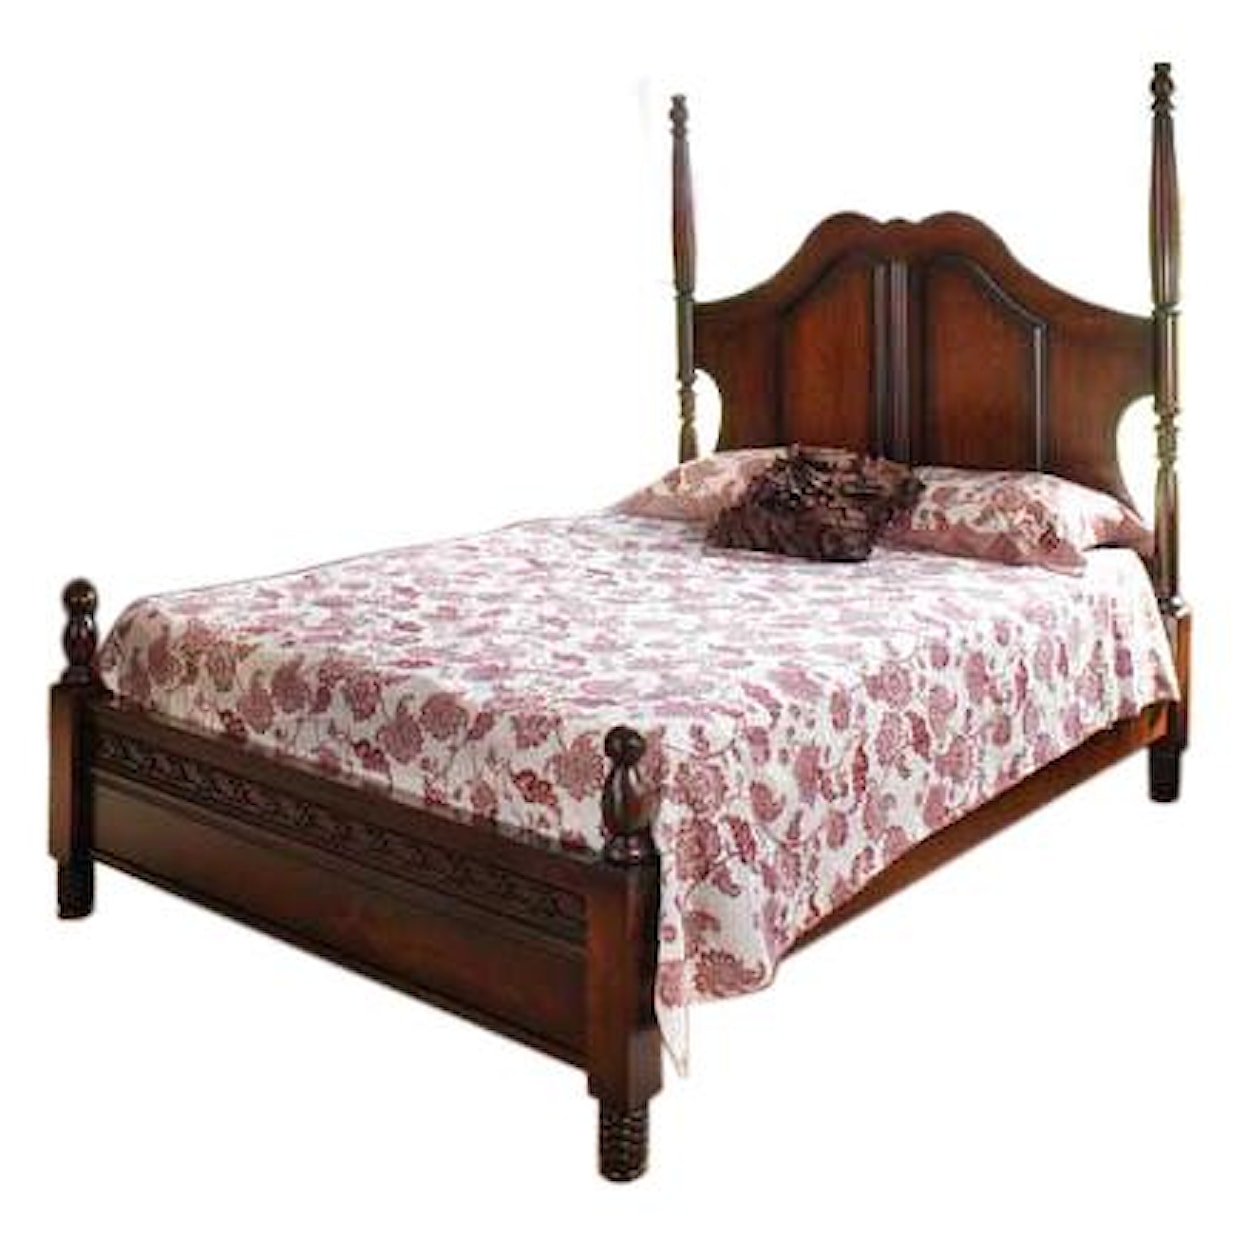 The Urban Collection New Generations King Poster Bed